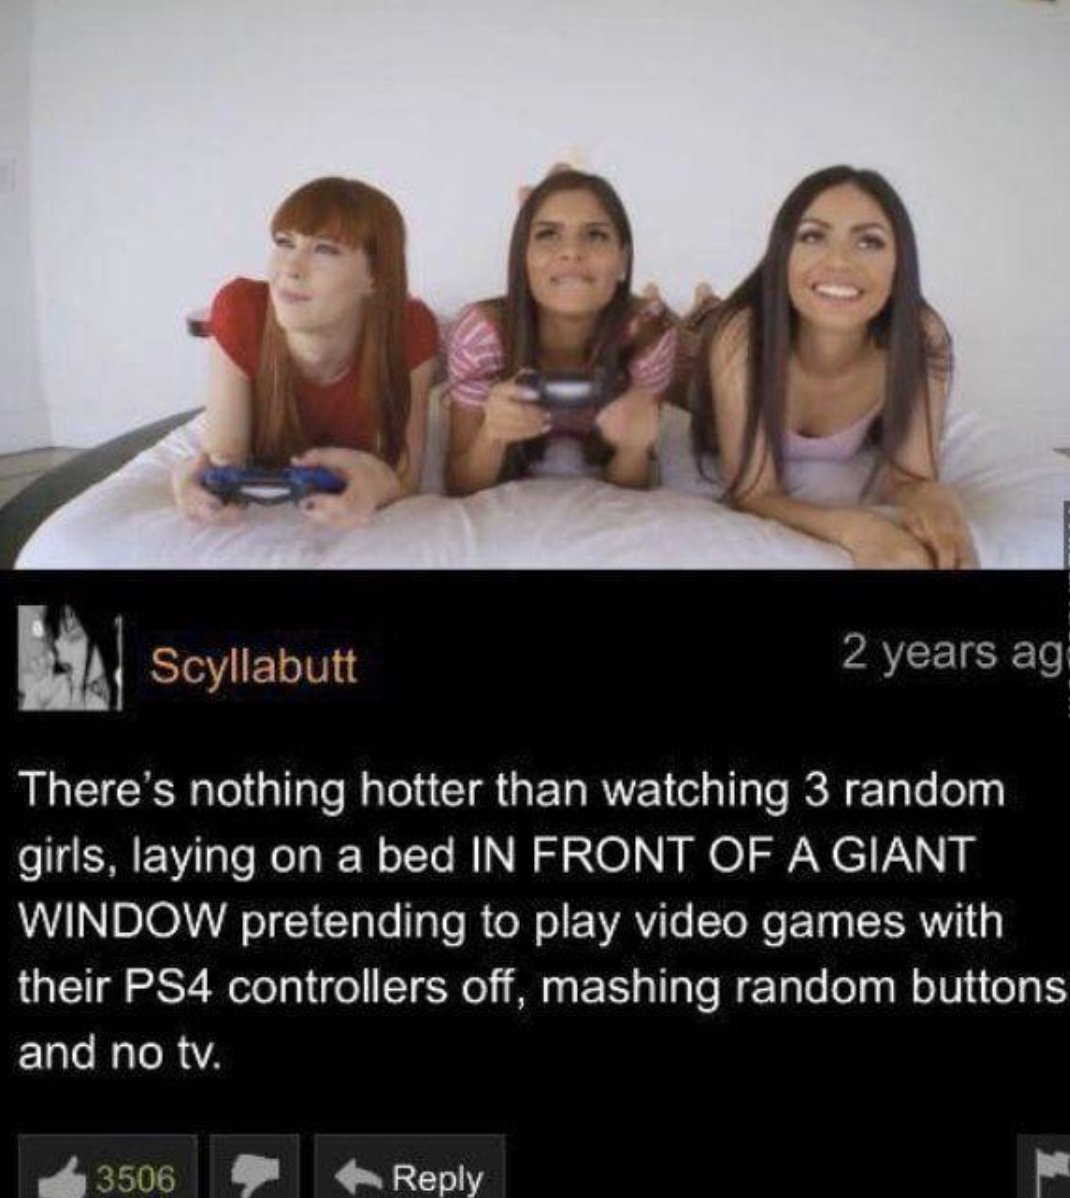 photo caption - Le 3506 Scyllabutt There's nothing hotter than watching 3 random girls, laying on a bed In Front Of A Giant Window pretending to play video games with their PS4 controllers off, mashing random buttons and no tv. 2 years ag